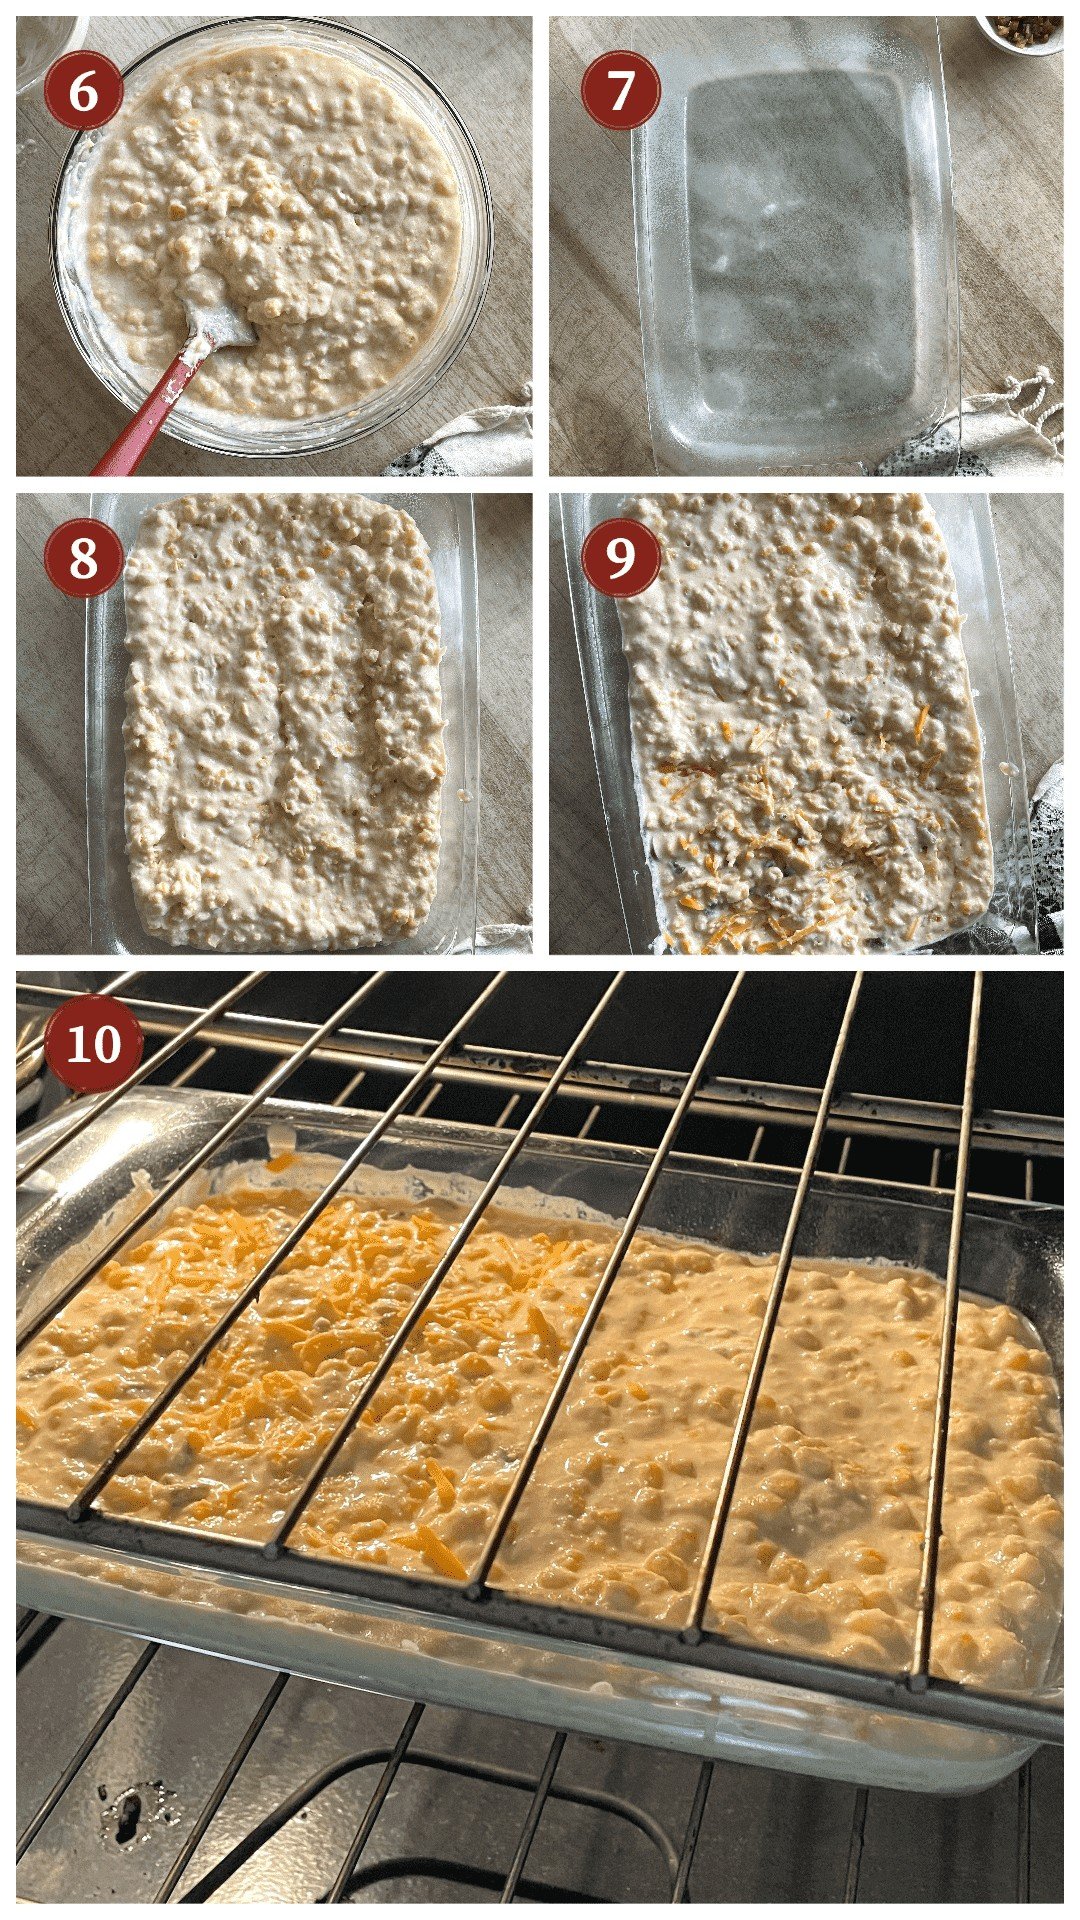 A collage of images showing how to make corn pudding, steps 6 - 10.